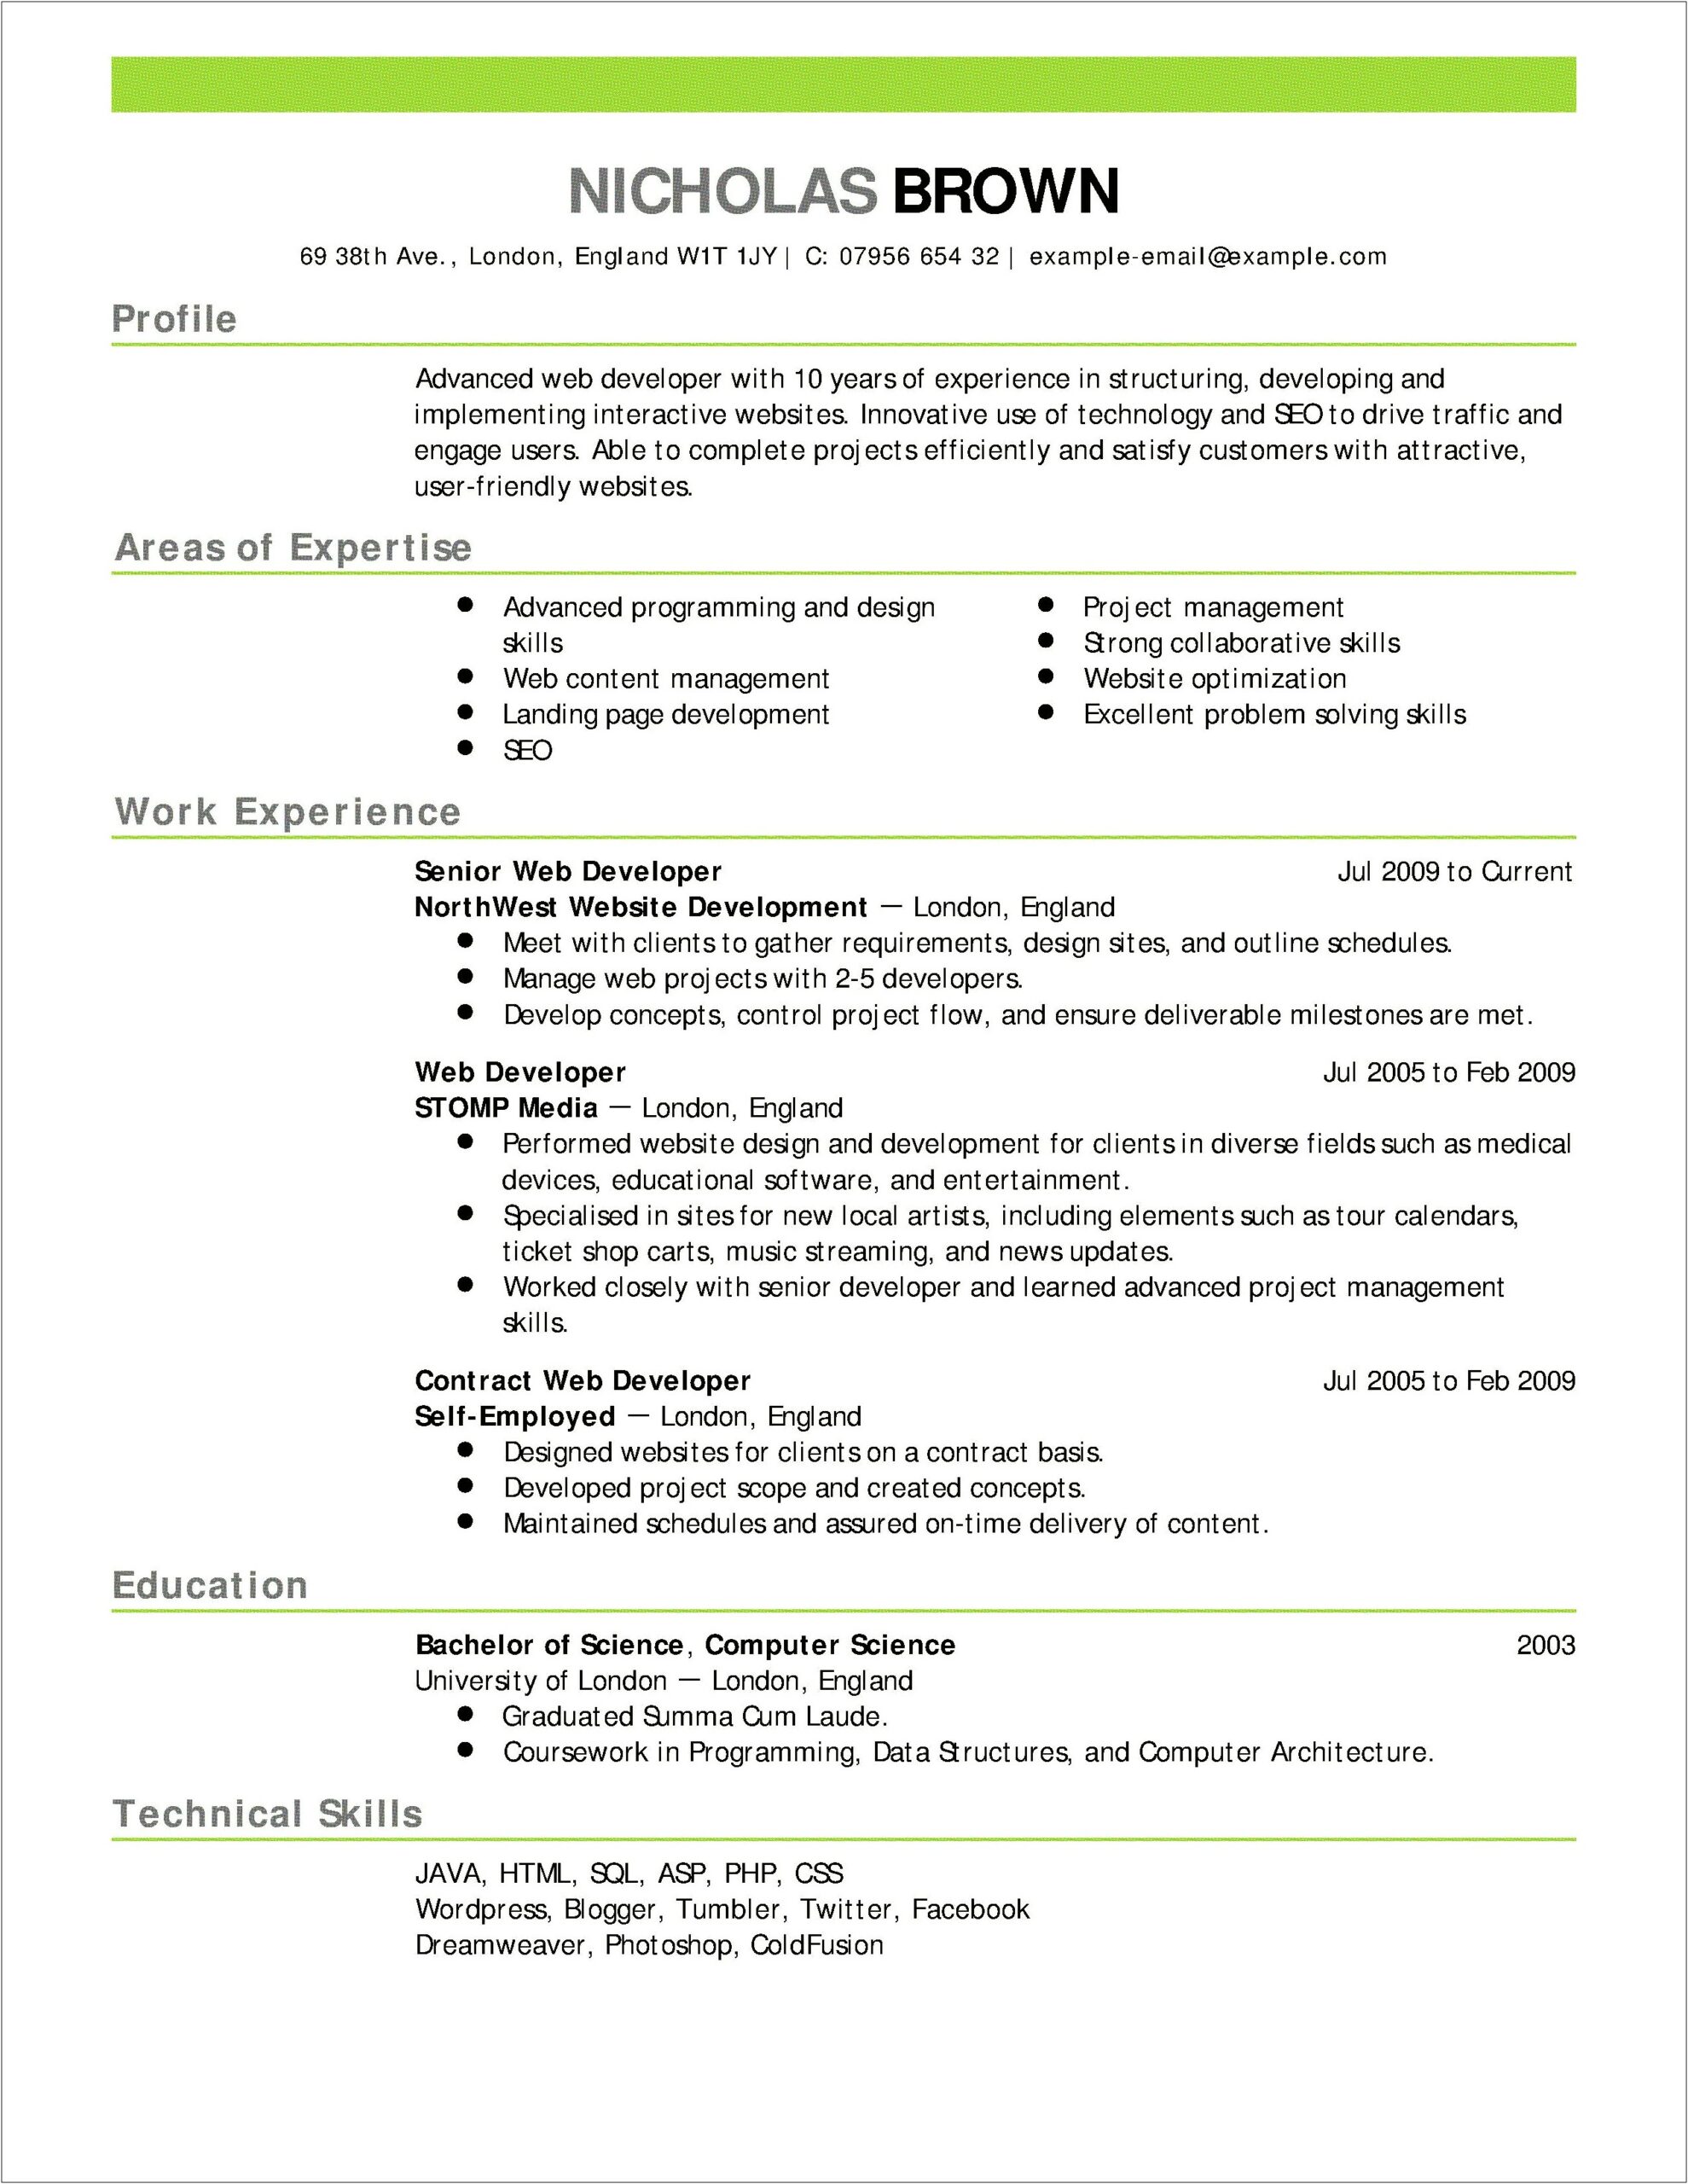 Michigan Law Office Of Career Planning Resume Template